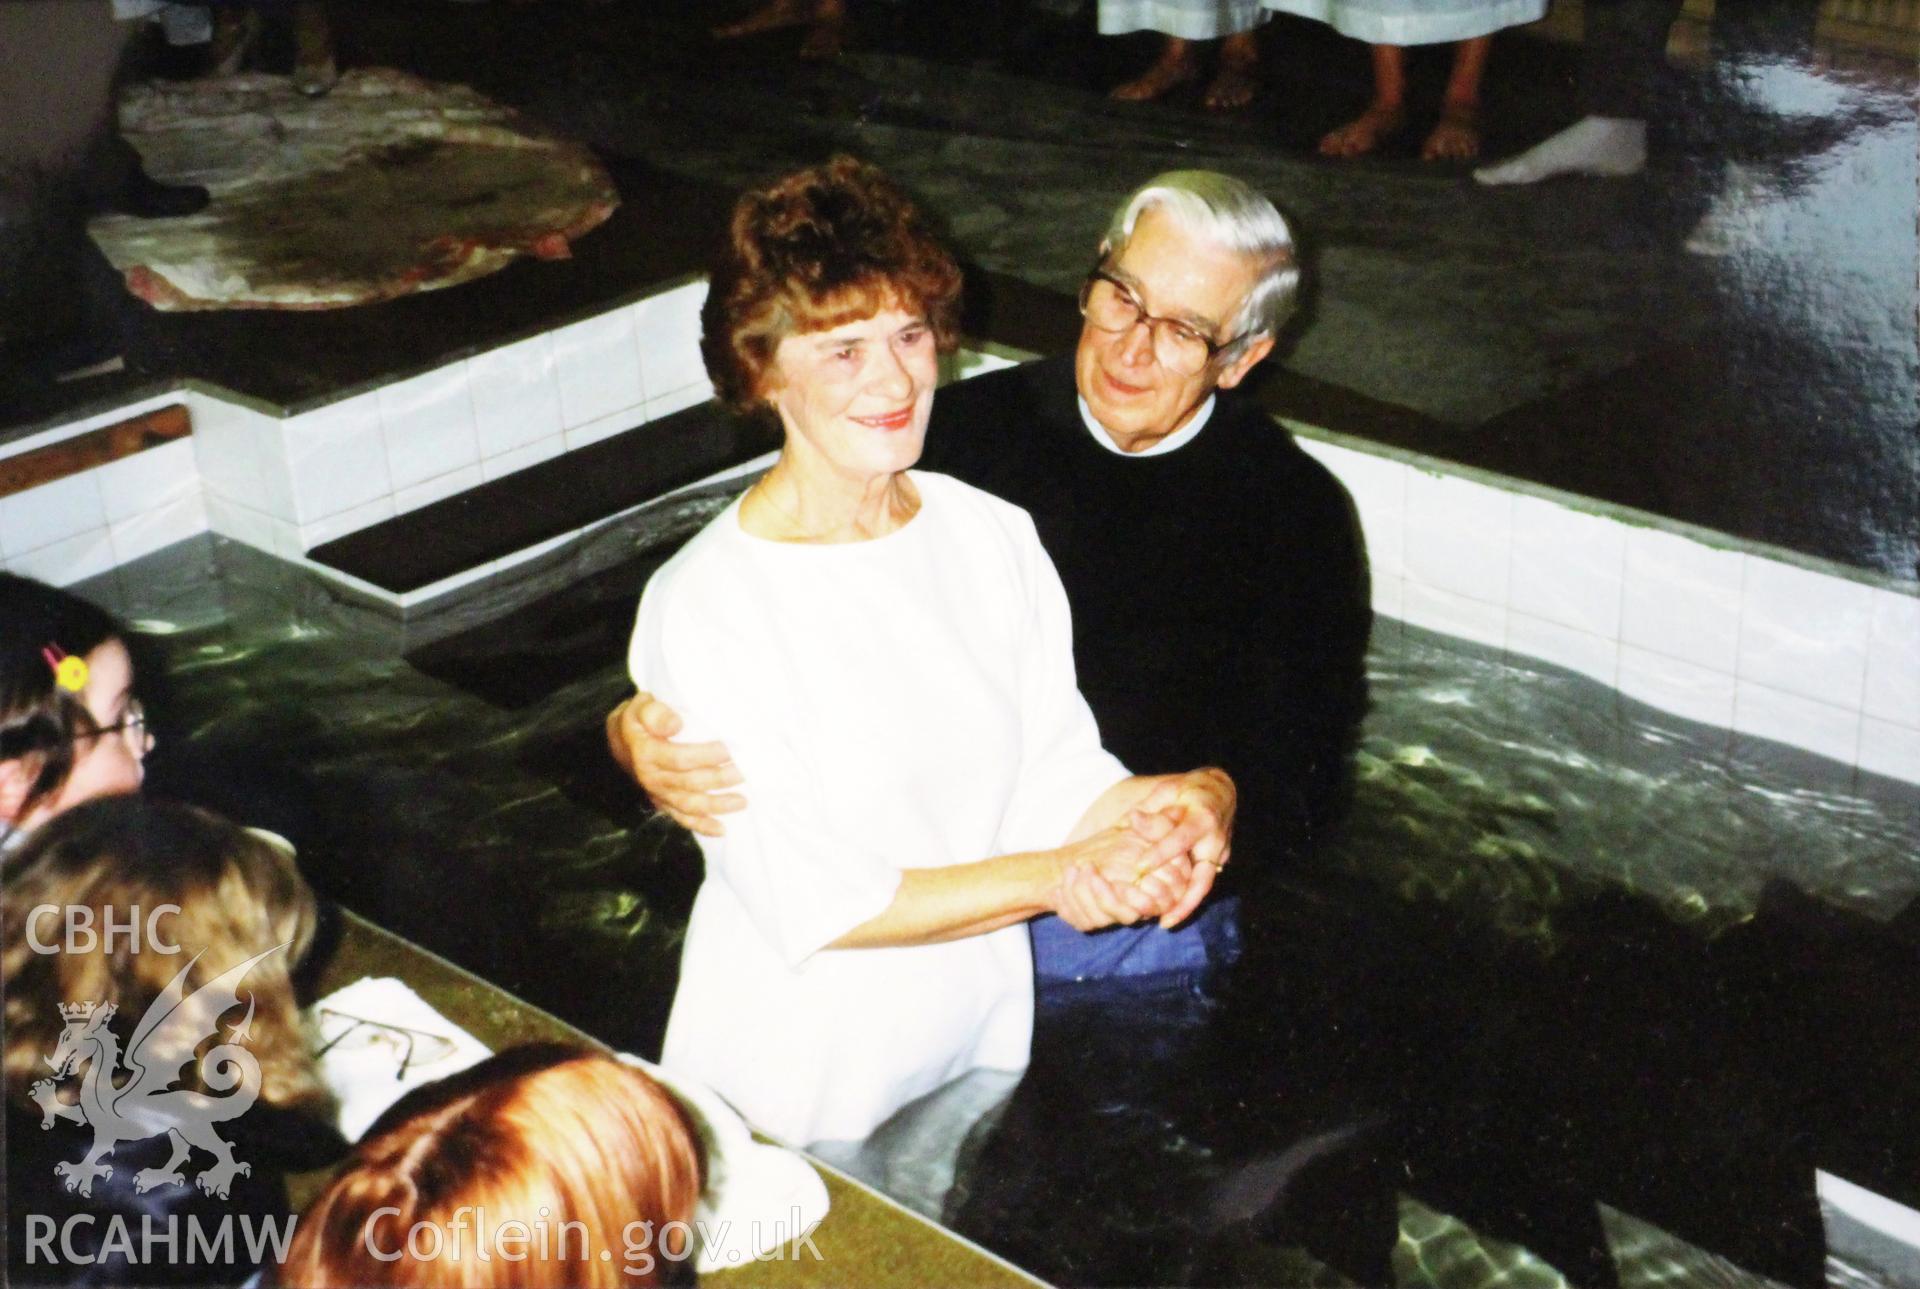 Colour photograph showing the minister baptising a member of the congregation at Riverside chapel, Port Talbot. Presumably photographed not long after the chapel was opened in 1974.